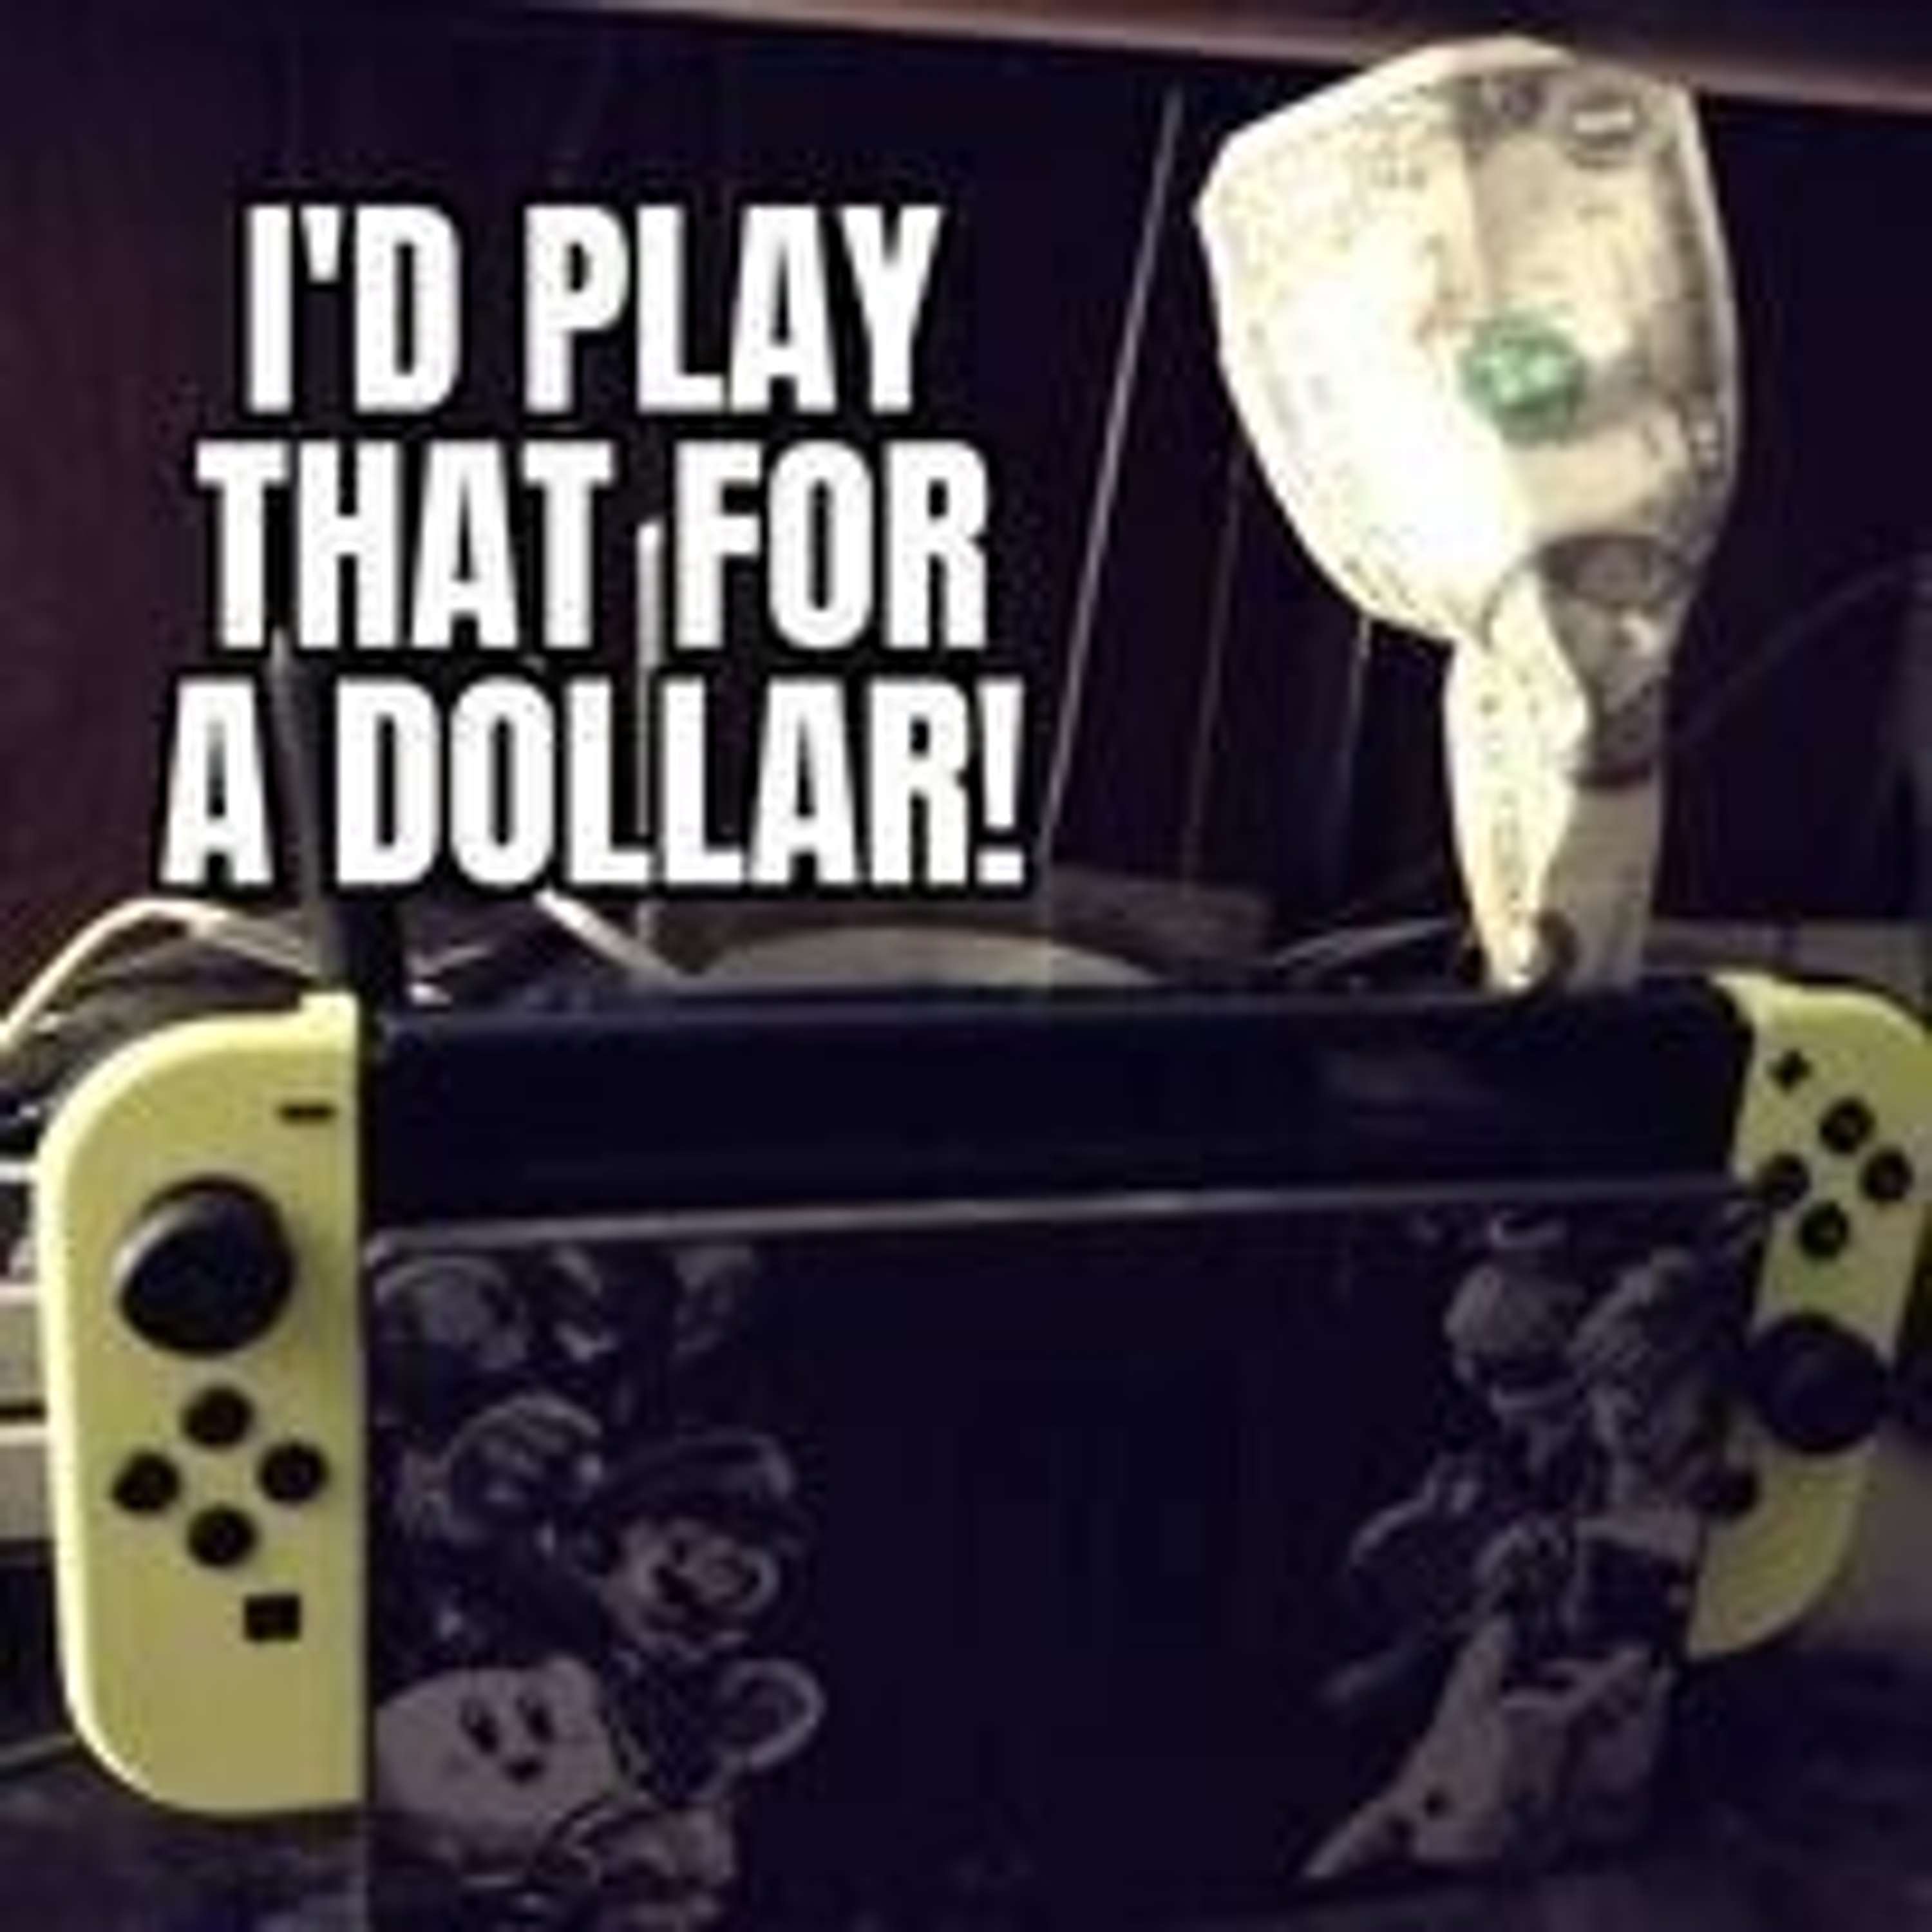 I’d Play That For A Dollar: Eleven Cents Is Your Change